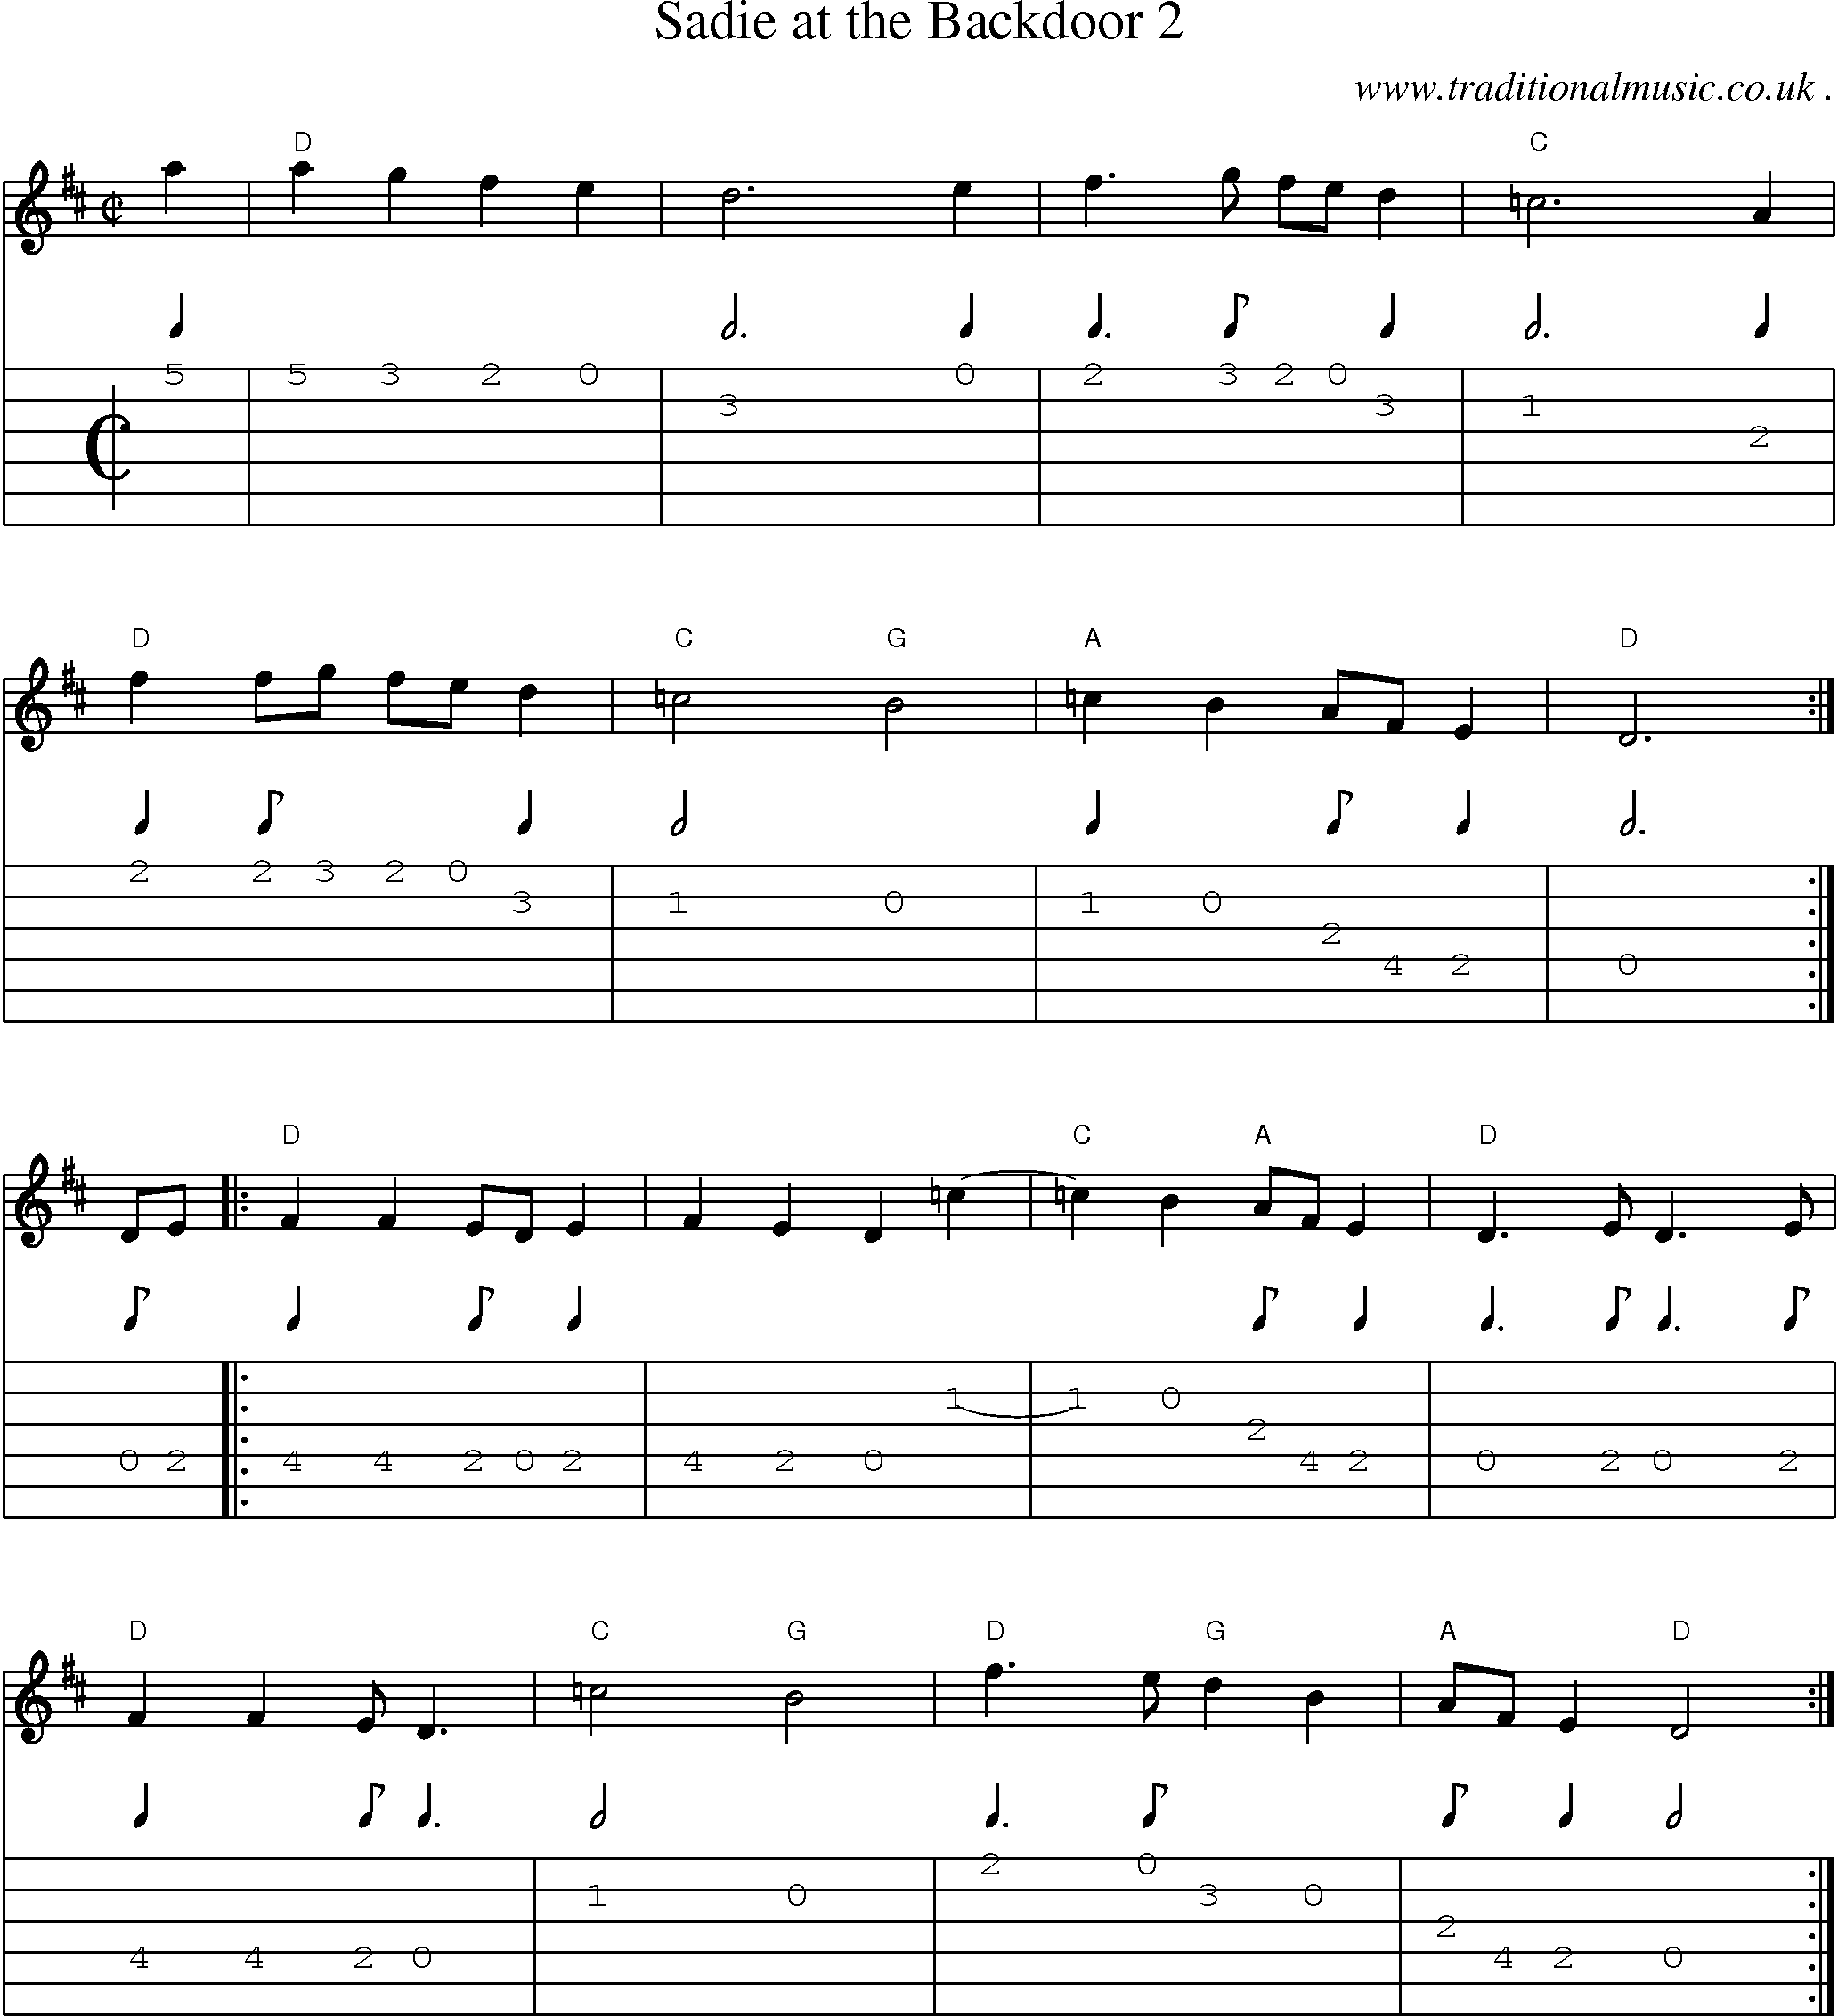 Music Score and Guitar Tabs for Sadie At The Backdoor 2